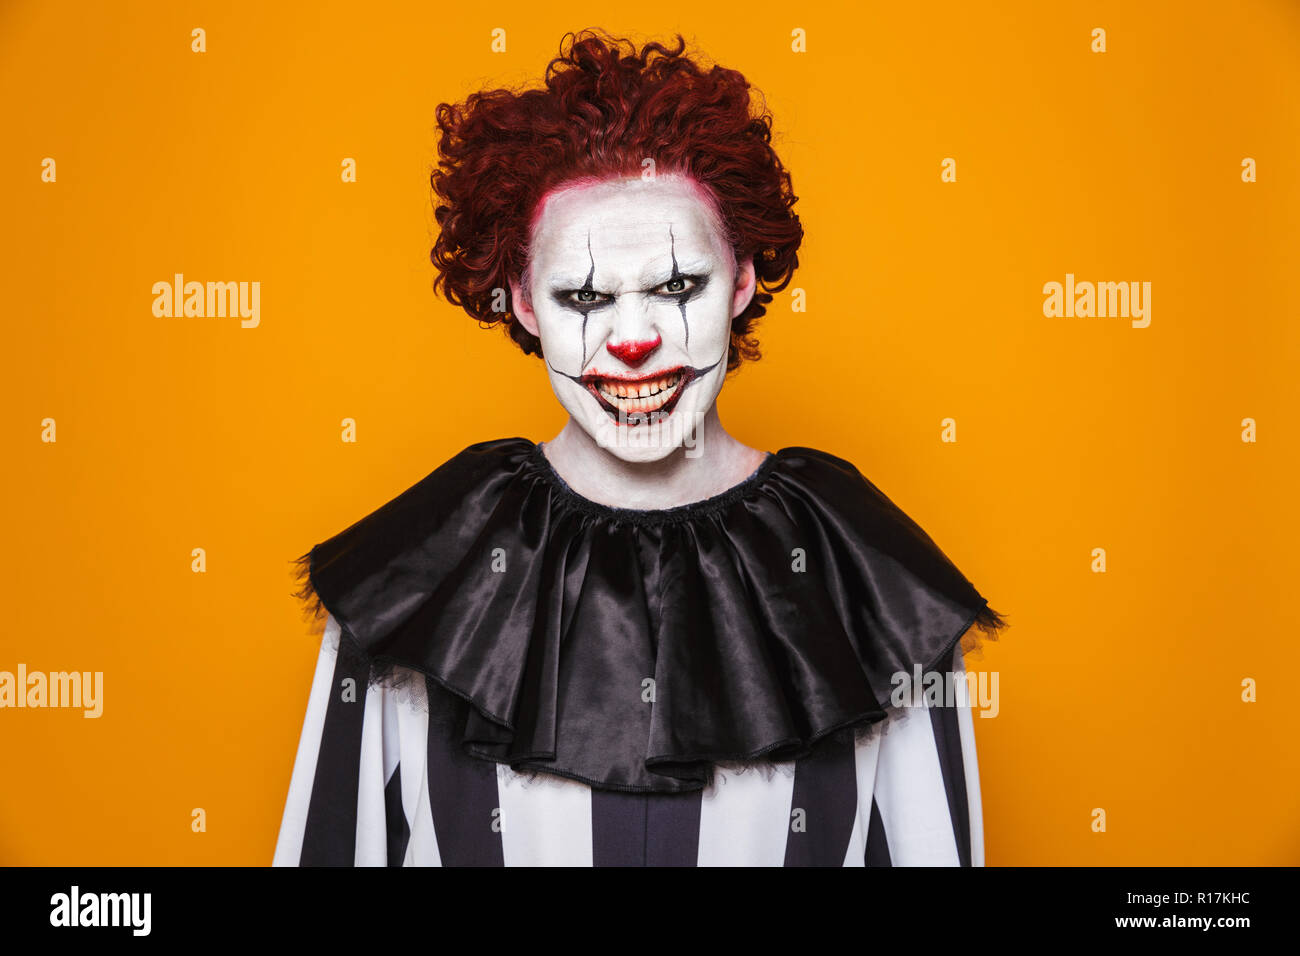 Angry clown man 20s wearing black costume and halloween makeup looking at camera isolated over yellow background Stock Photo